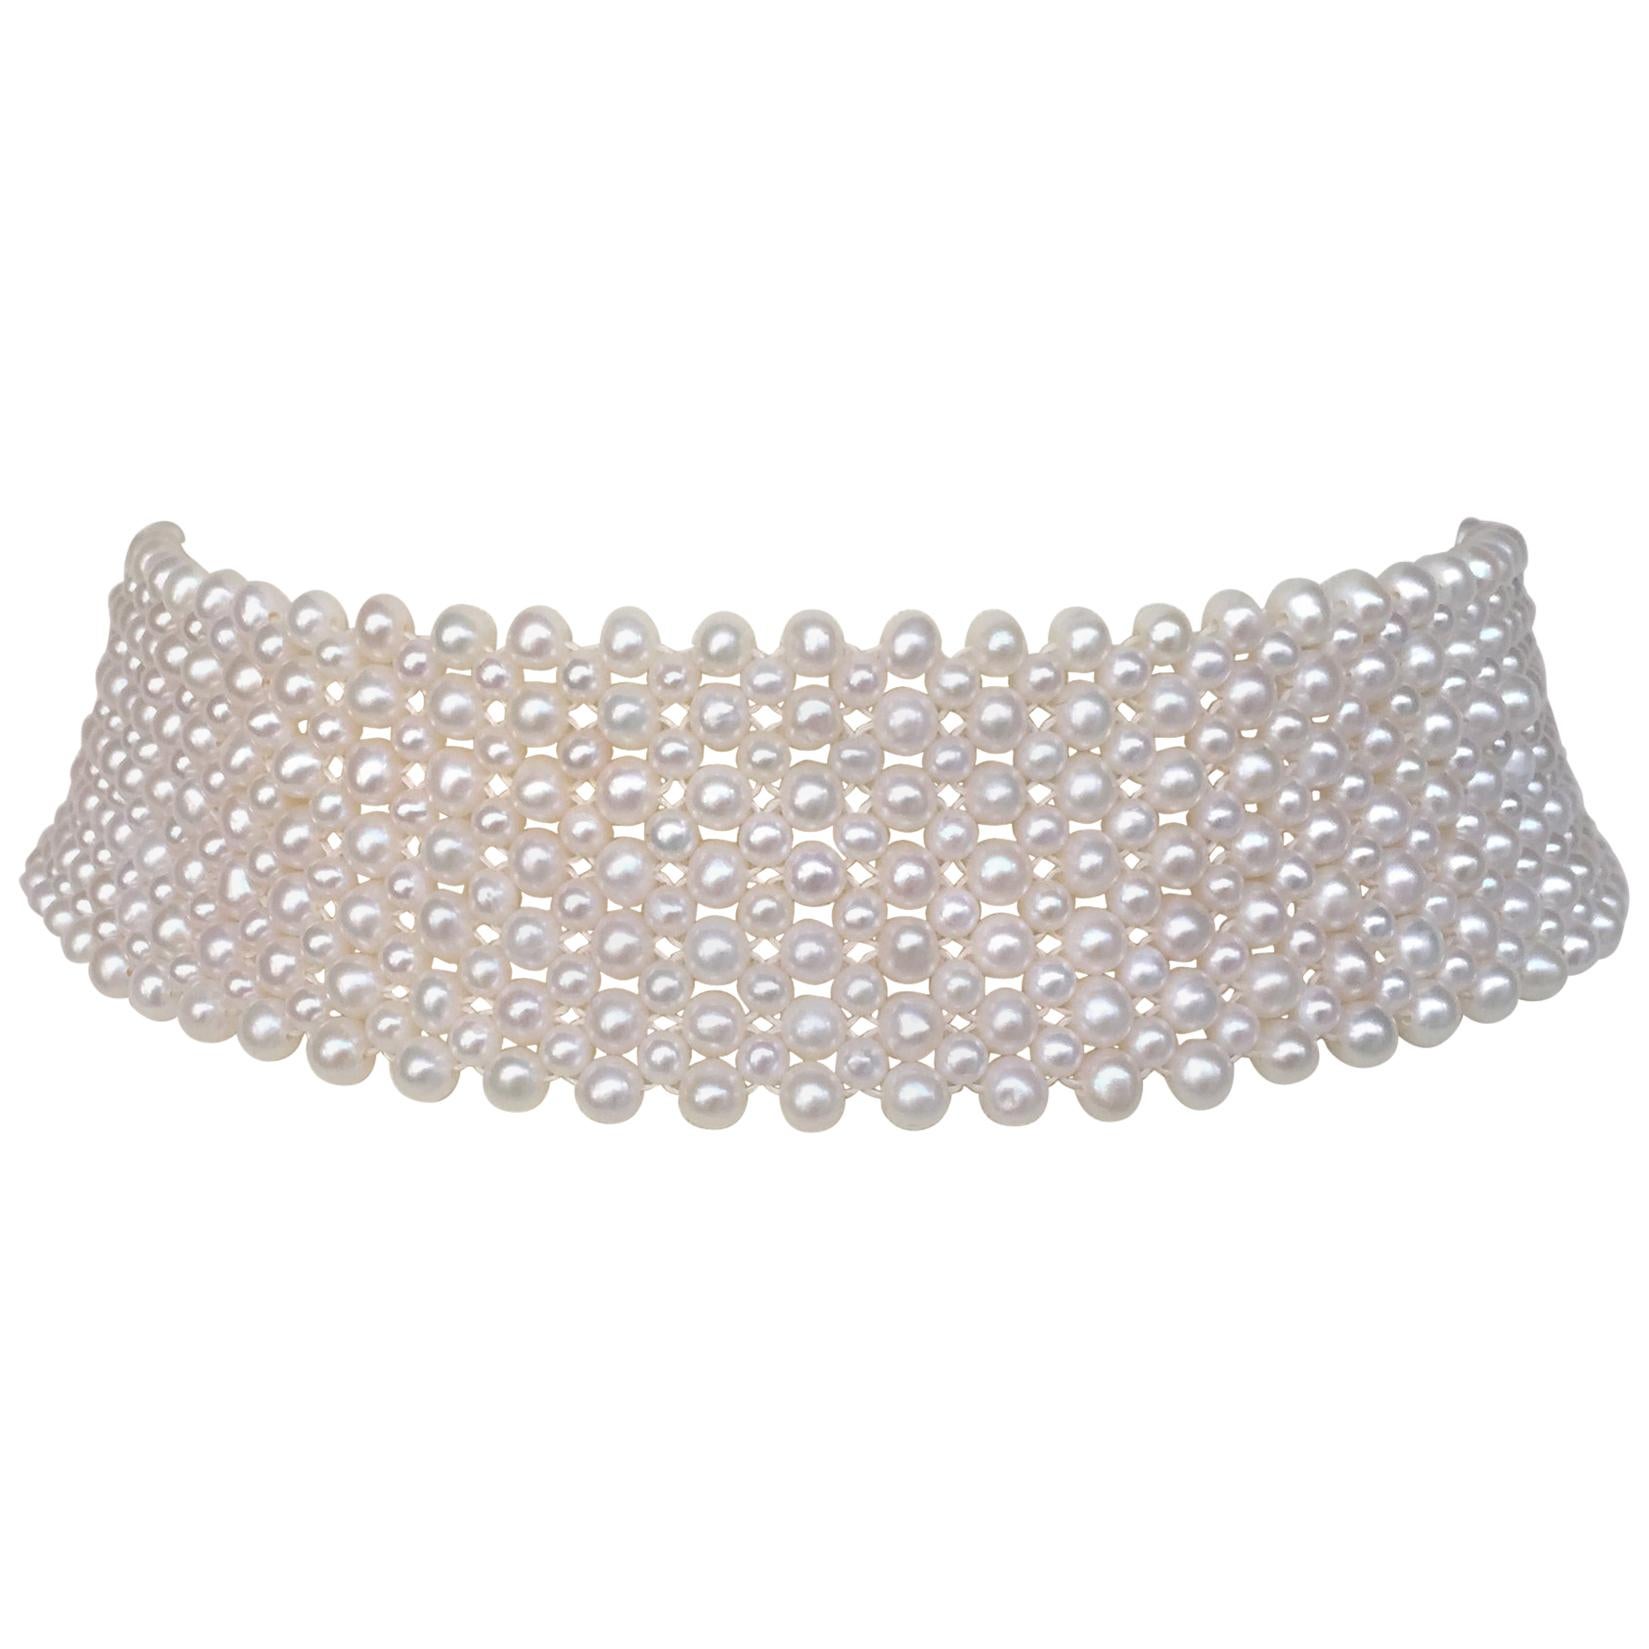 Woven Round White Pearl Wide Choker with Sterling Silver Sliding Clasp